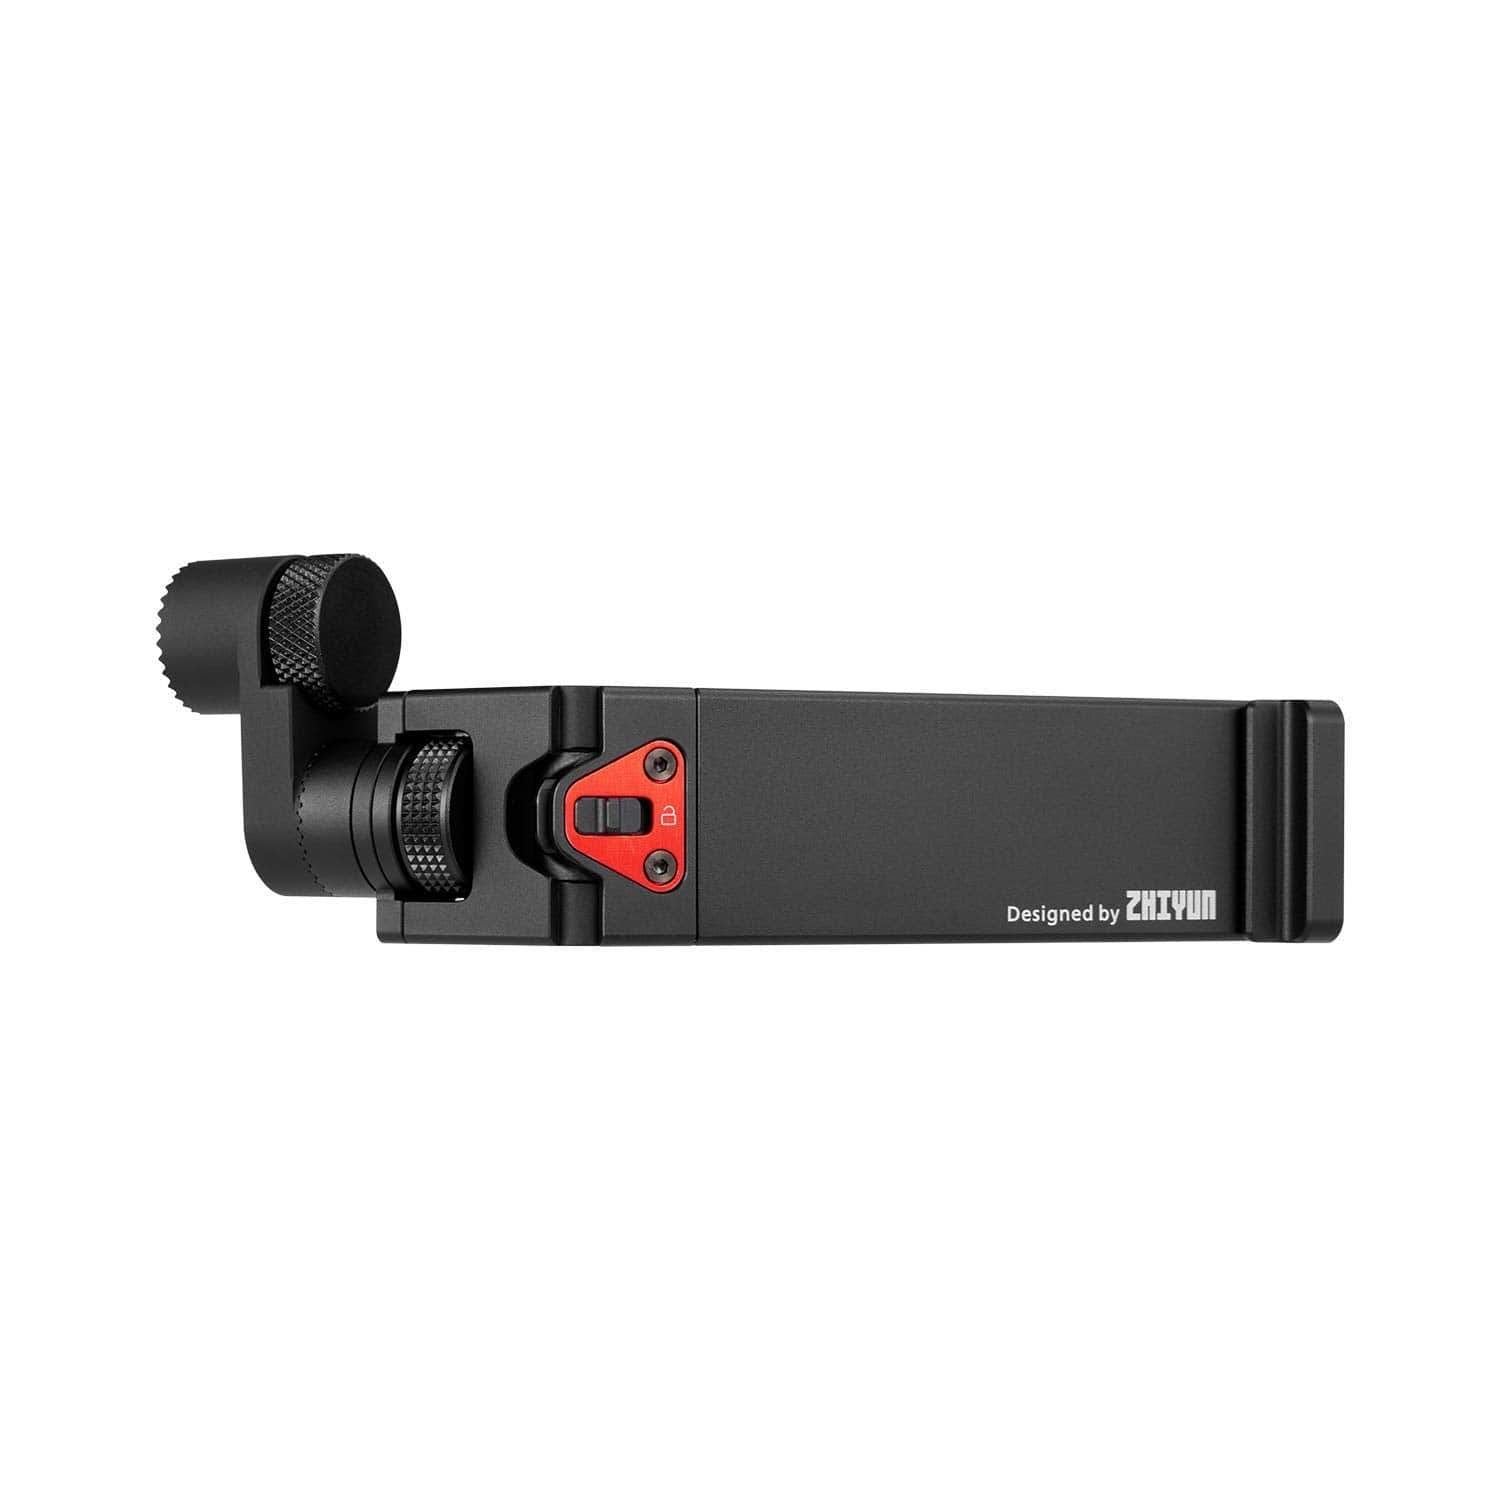 Accessories for Weebill S – ZHIYUN Store